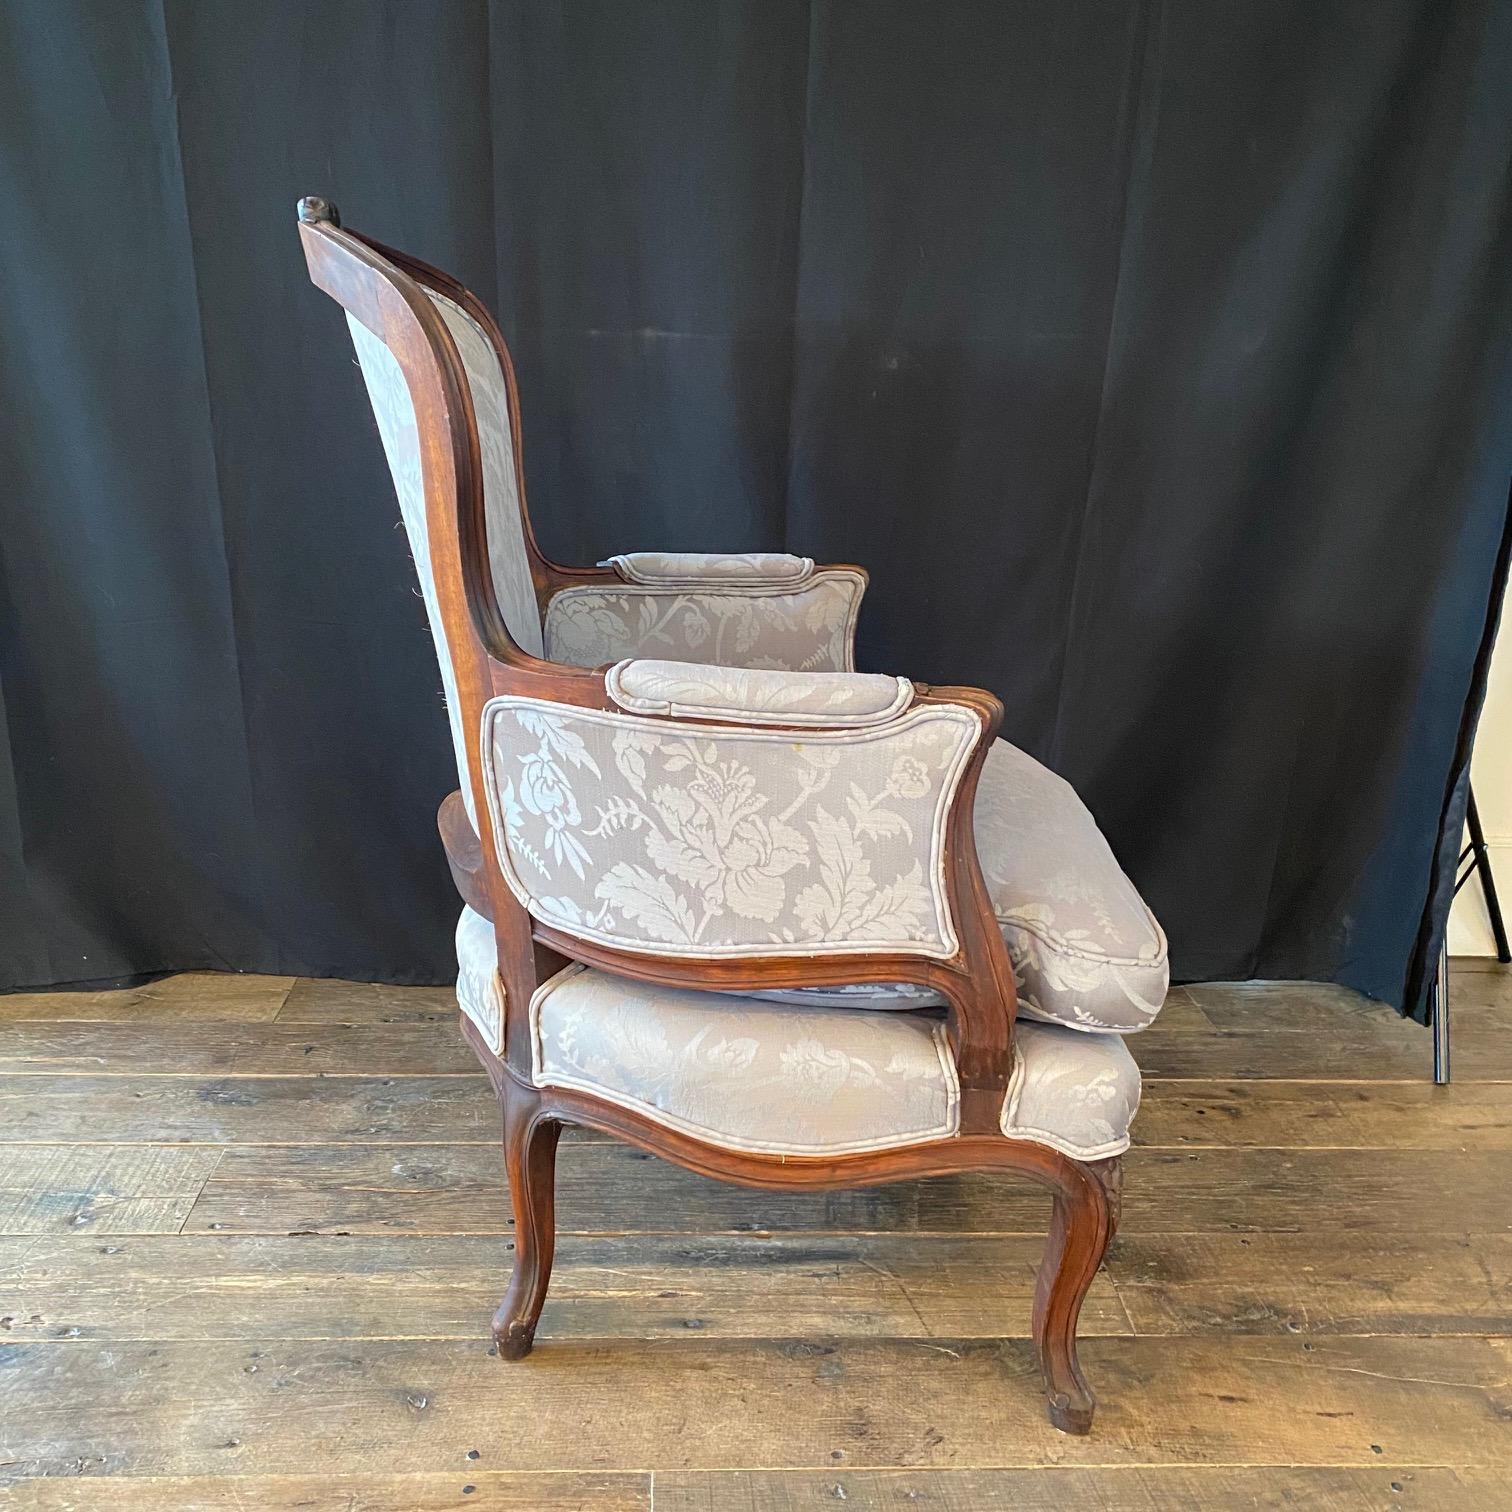 A lovely and very comfortable early 20th century French Louis XV style bergère armchair having beautifully carved walnut wood with loose shaped feathered cushions and curved legs. Lovely shape with great proportions and nice high quality upholstery.